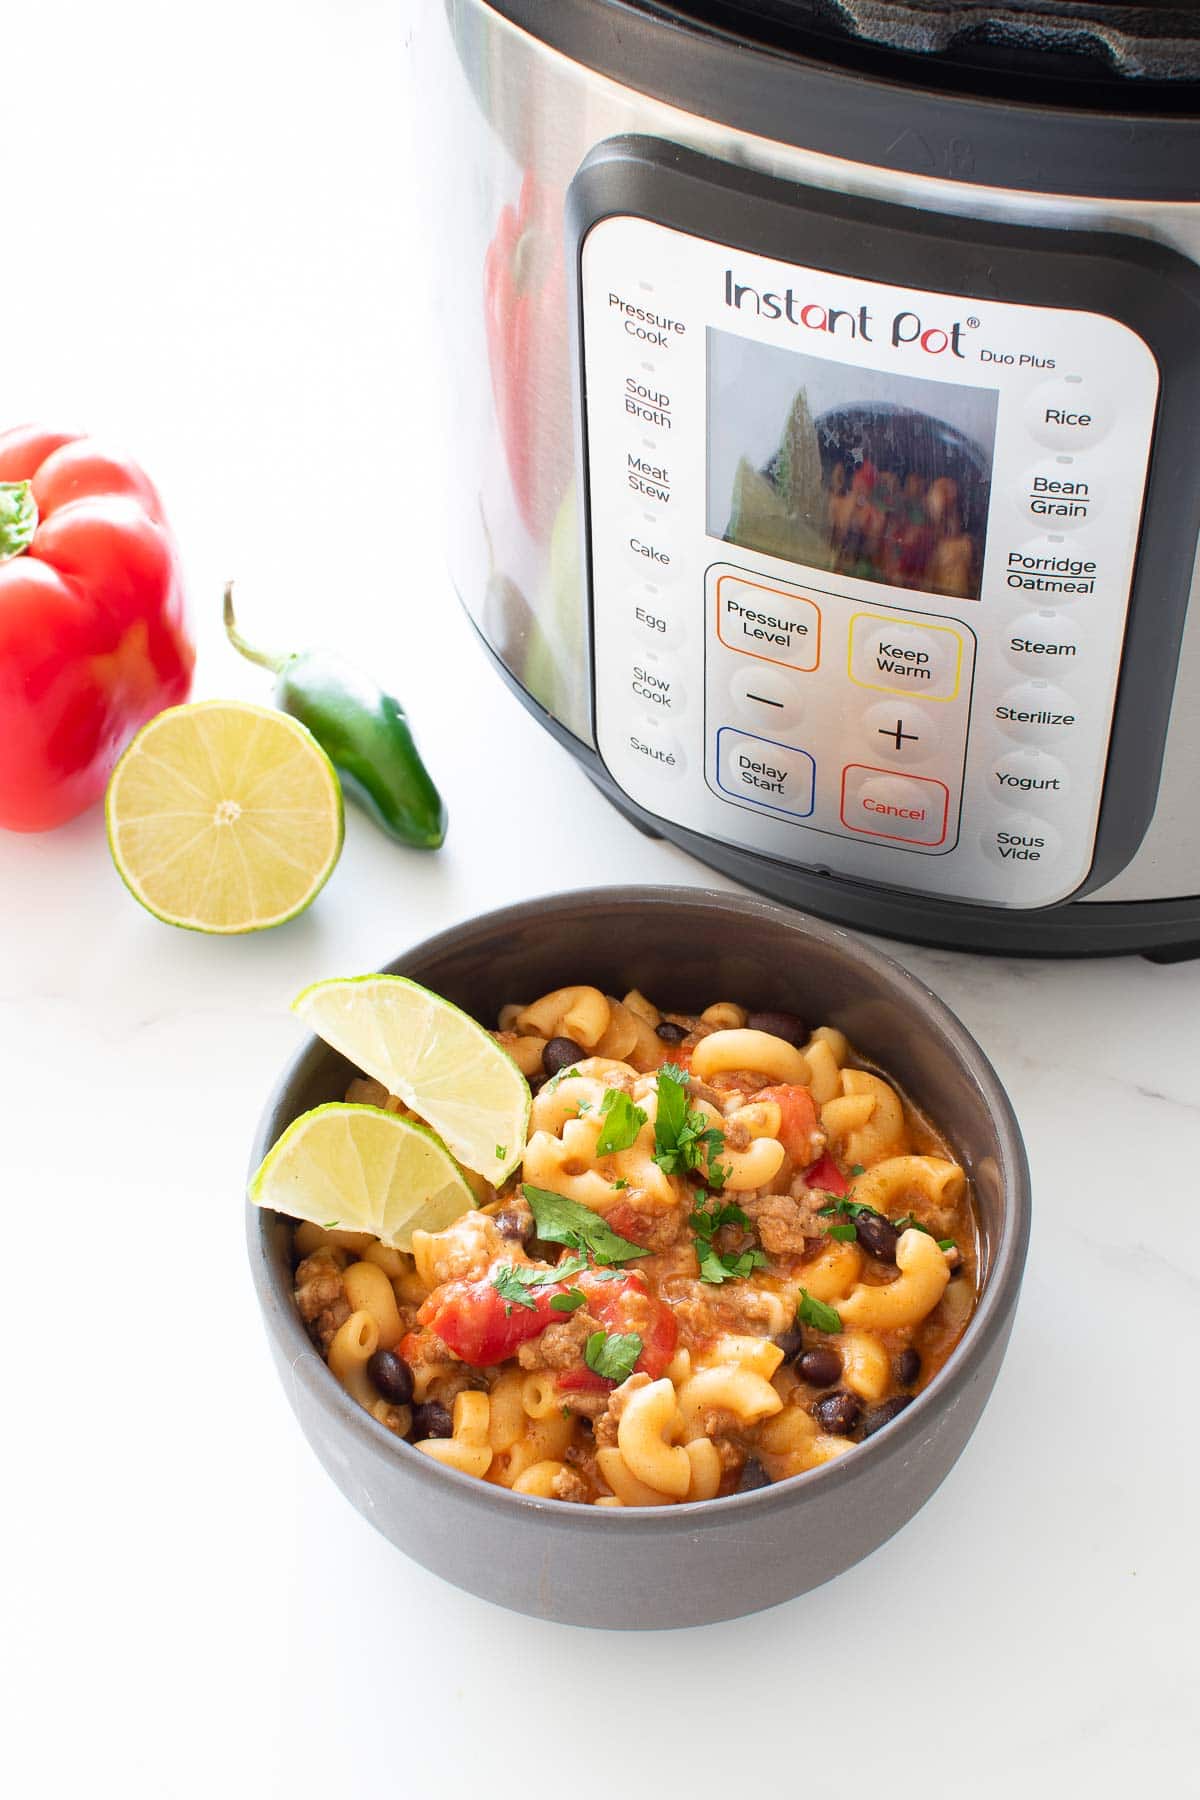 A bowl of chili mac, with an Instant Pot in the background.